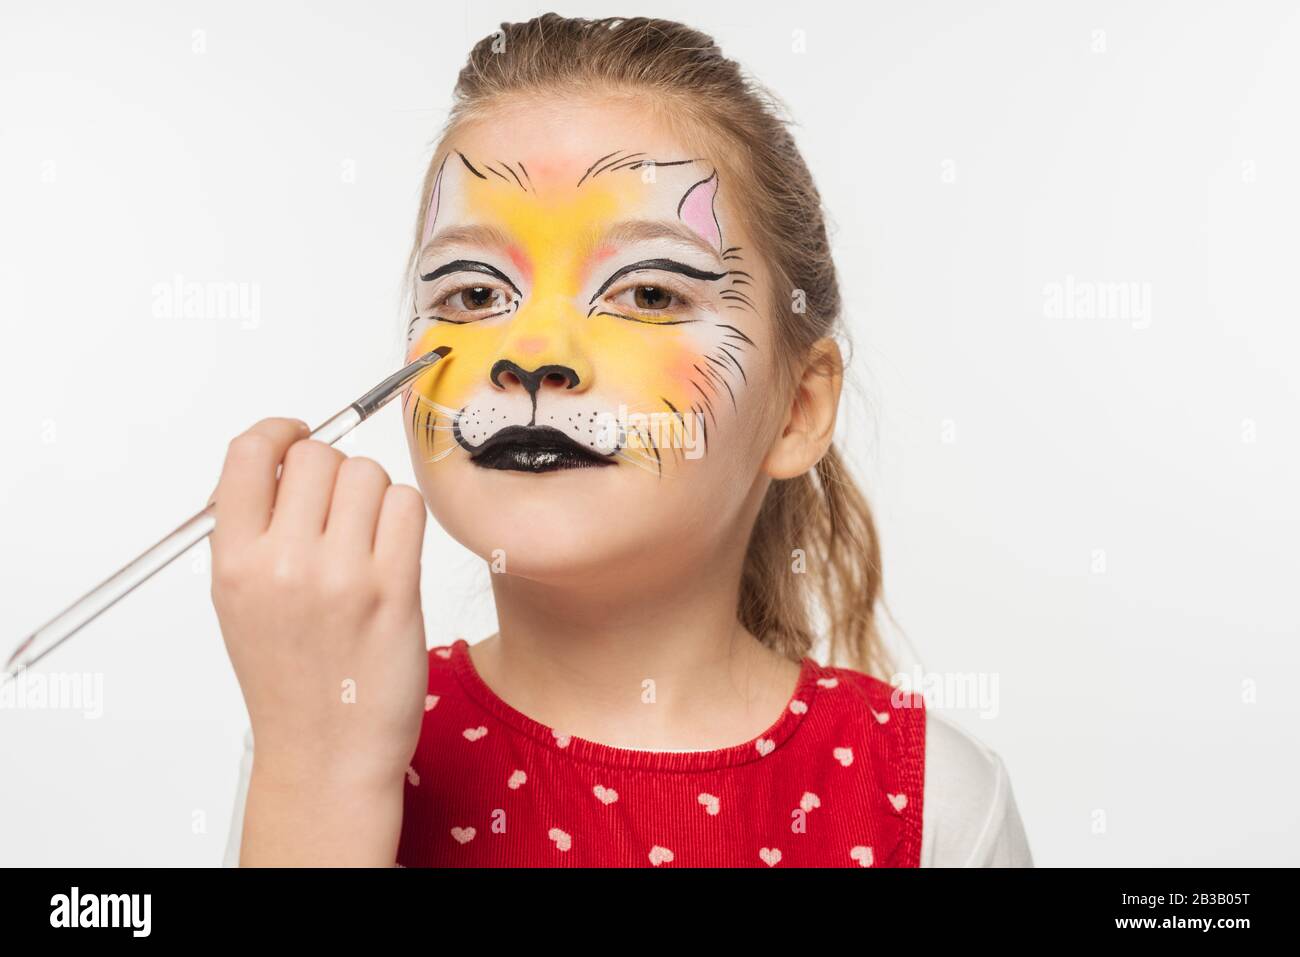 Cute Kid With Tiger Muzzle Painting On Face Holding Paintbrush